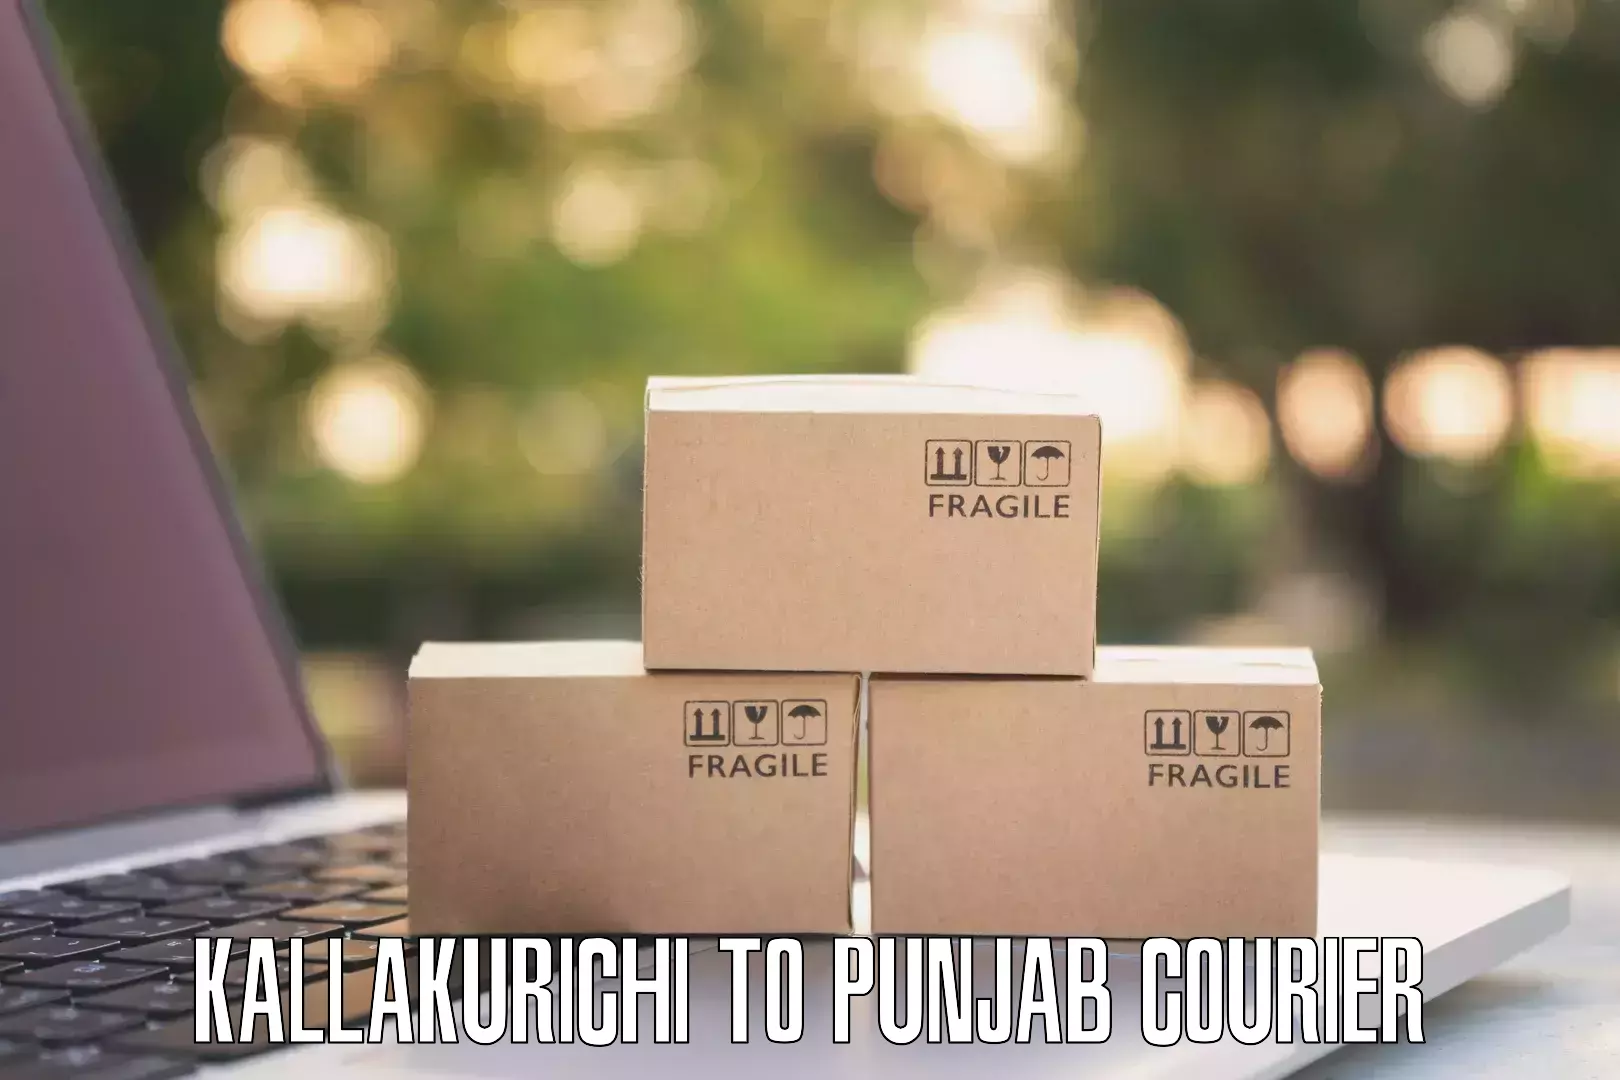 Courier service comparison in Kallakurichi to Pathankot